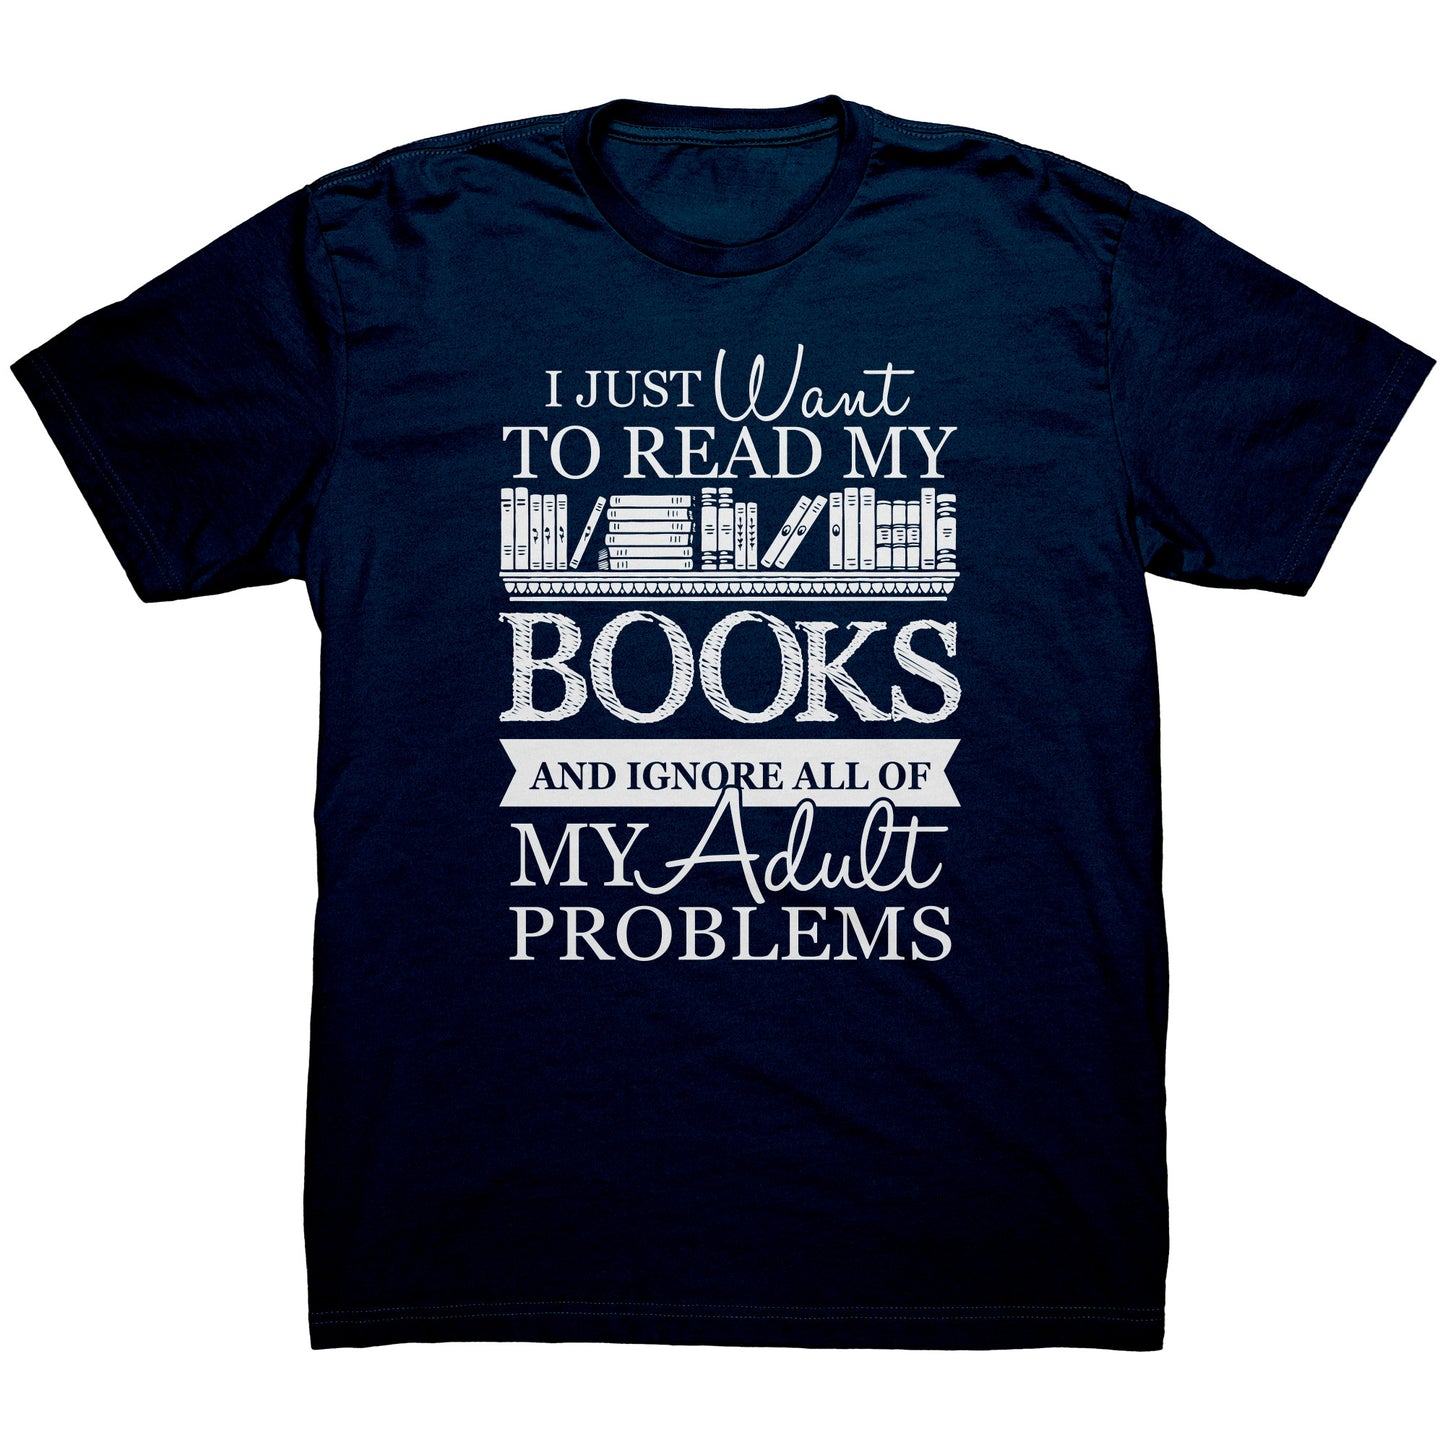 I Just Want To Read My Books And Ignore All Of My Adult Problems | Men's T-Shirt